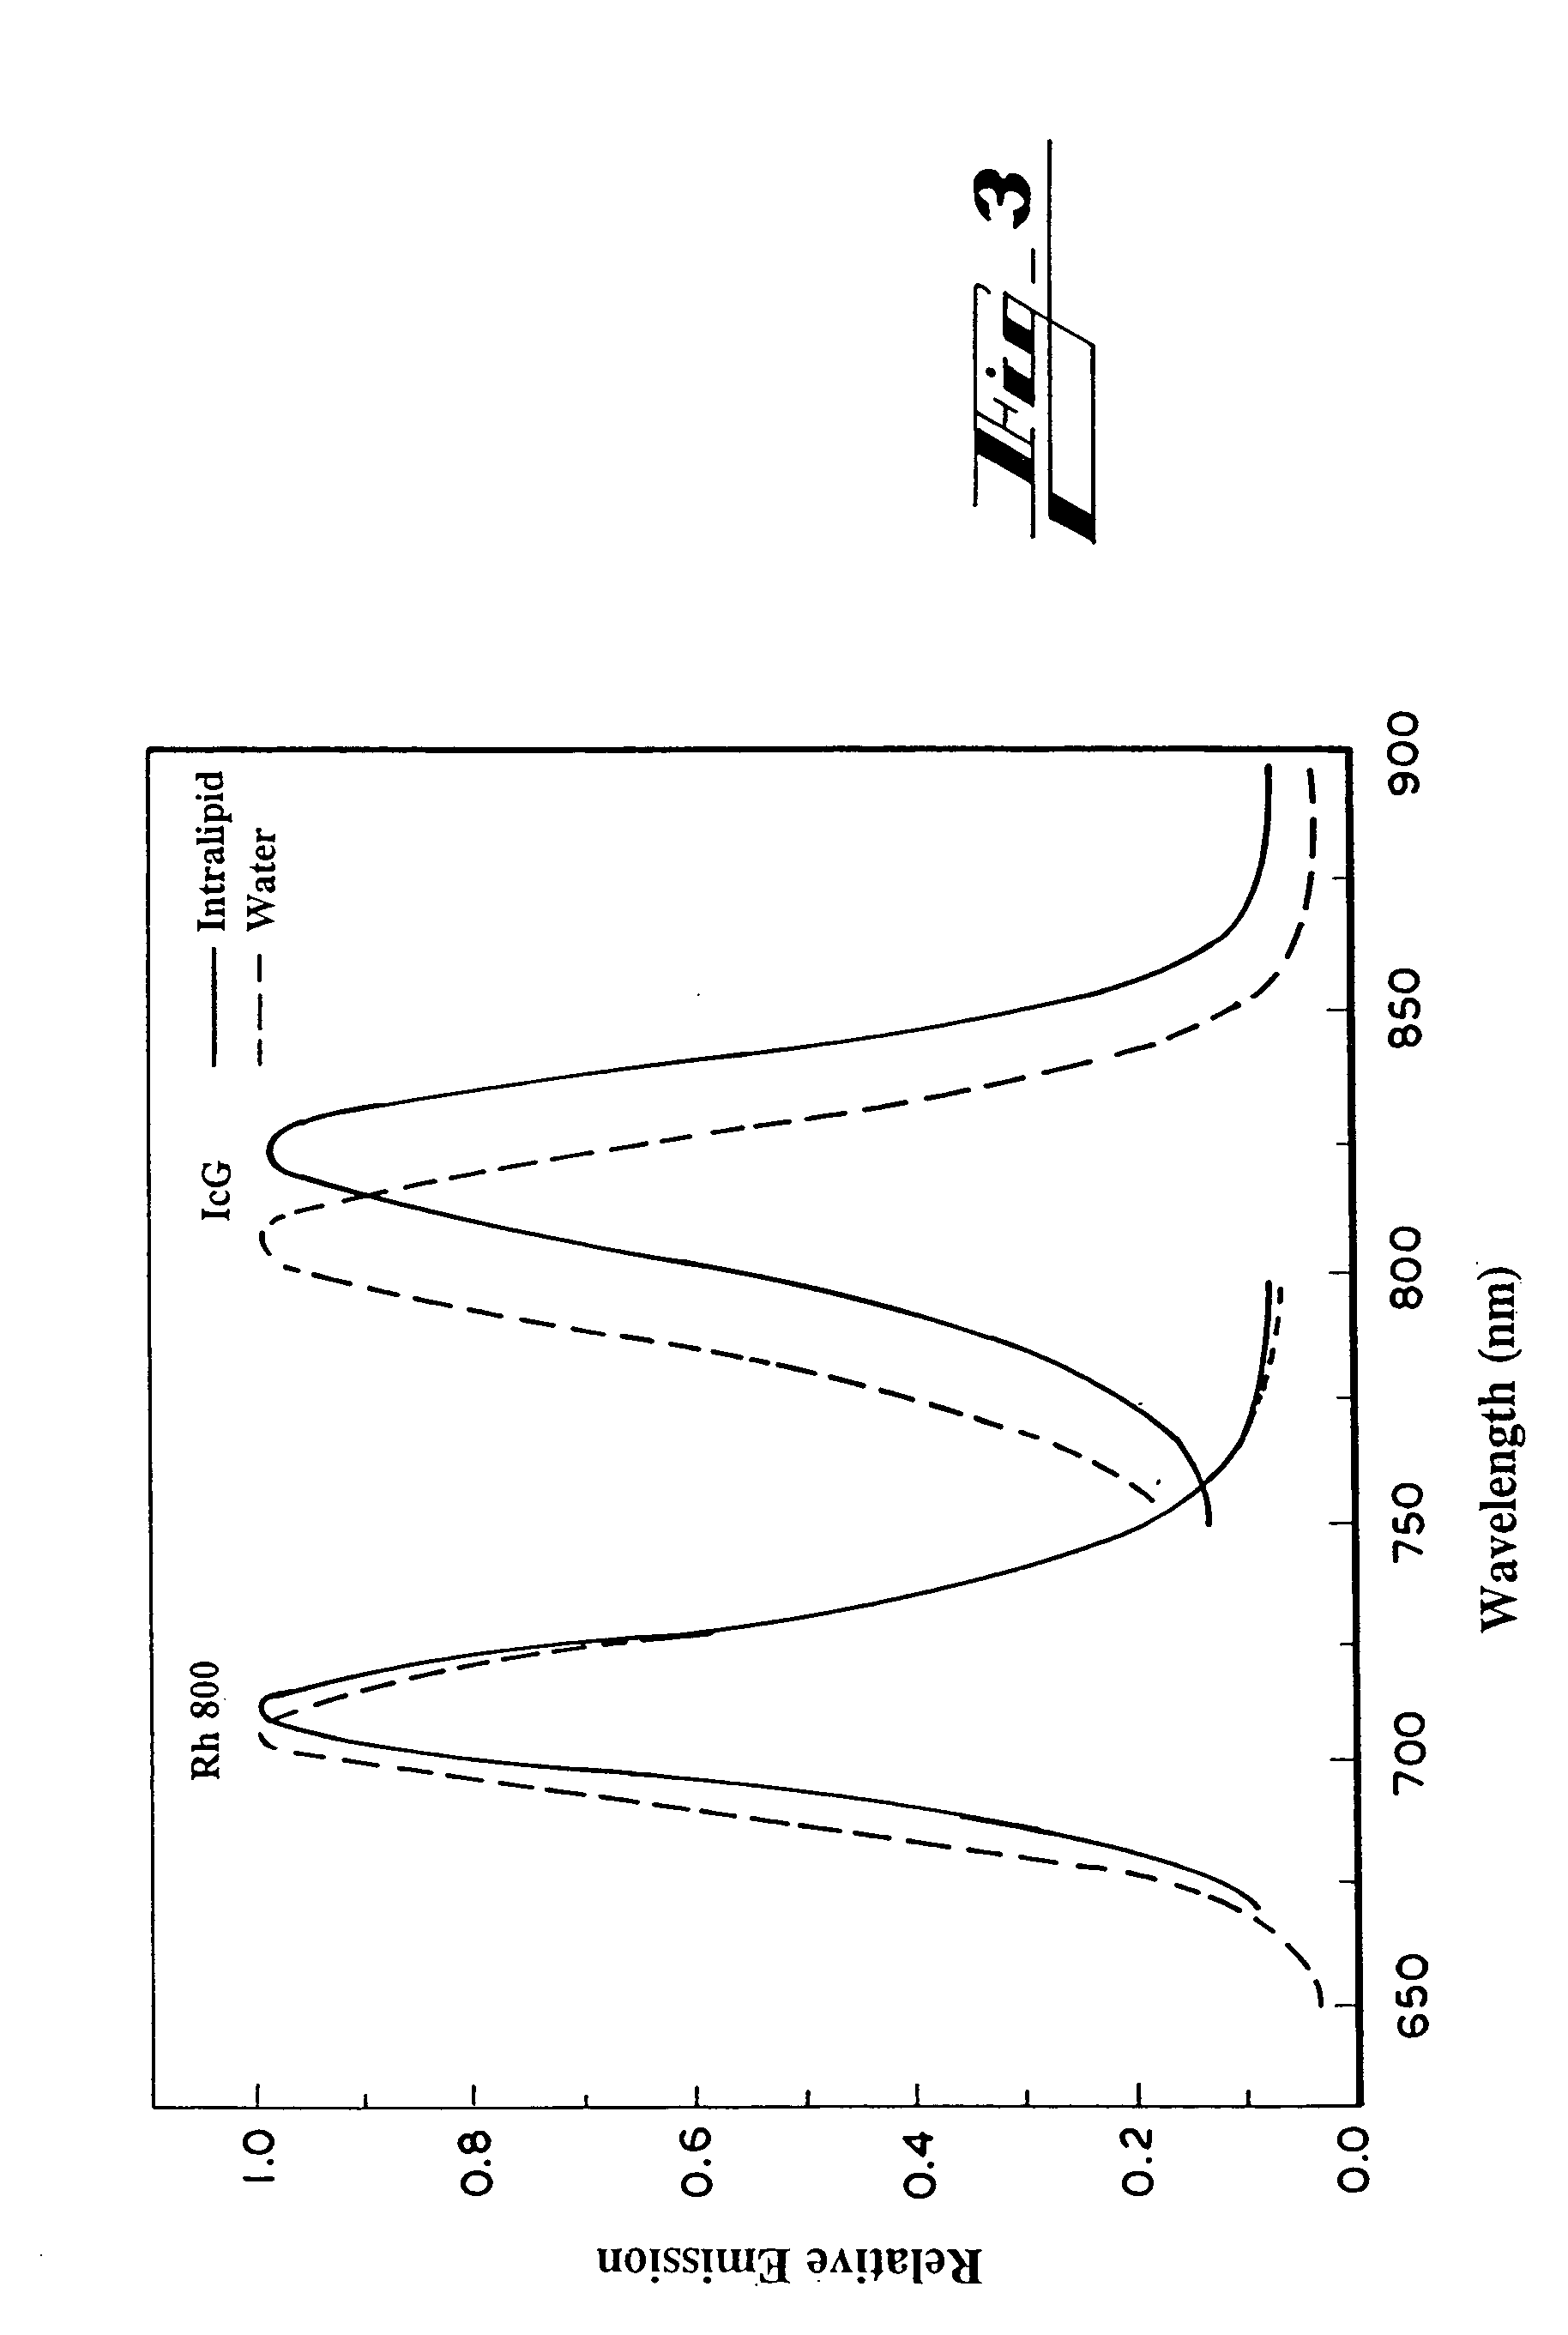 Methods and compositions comprising monitoring devices